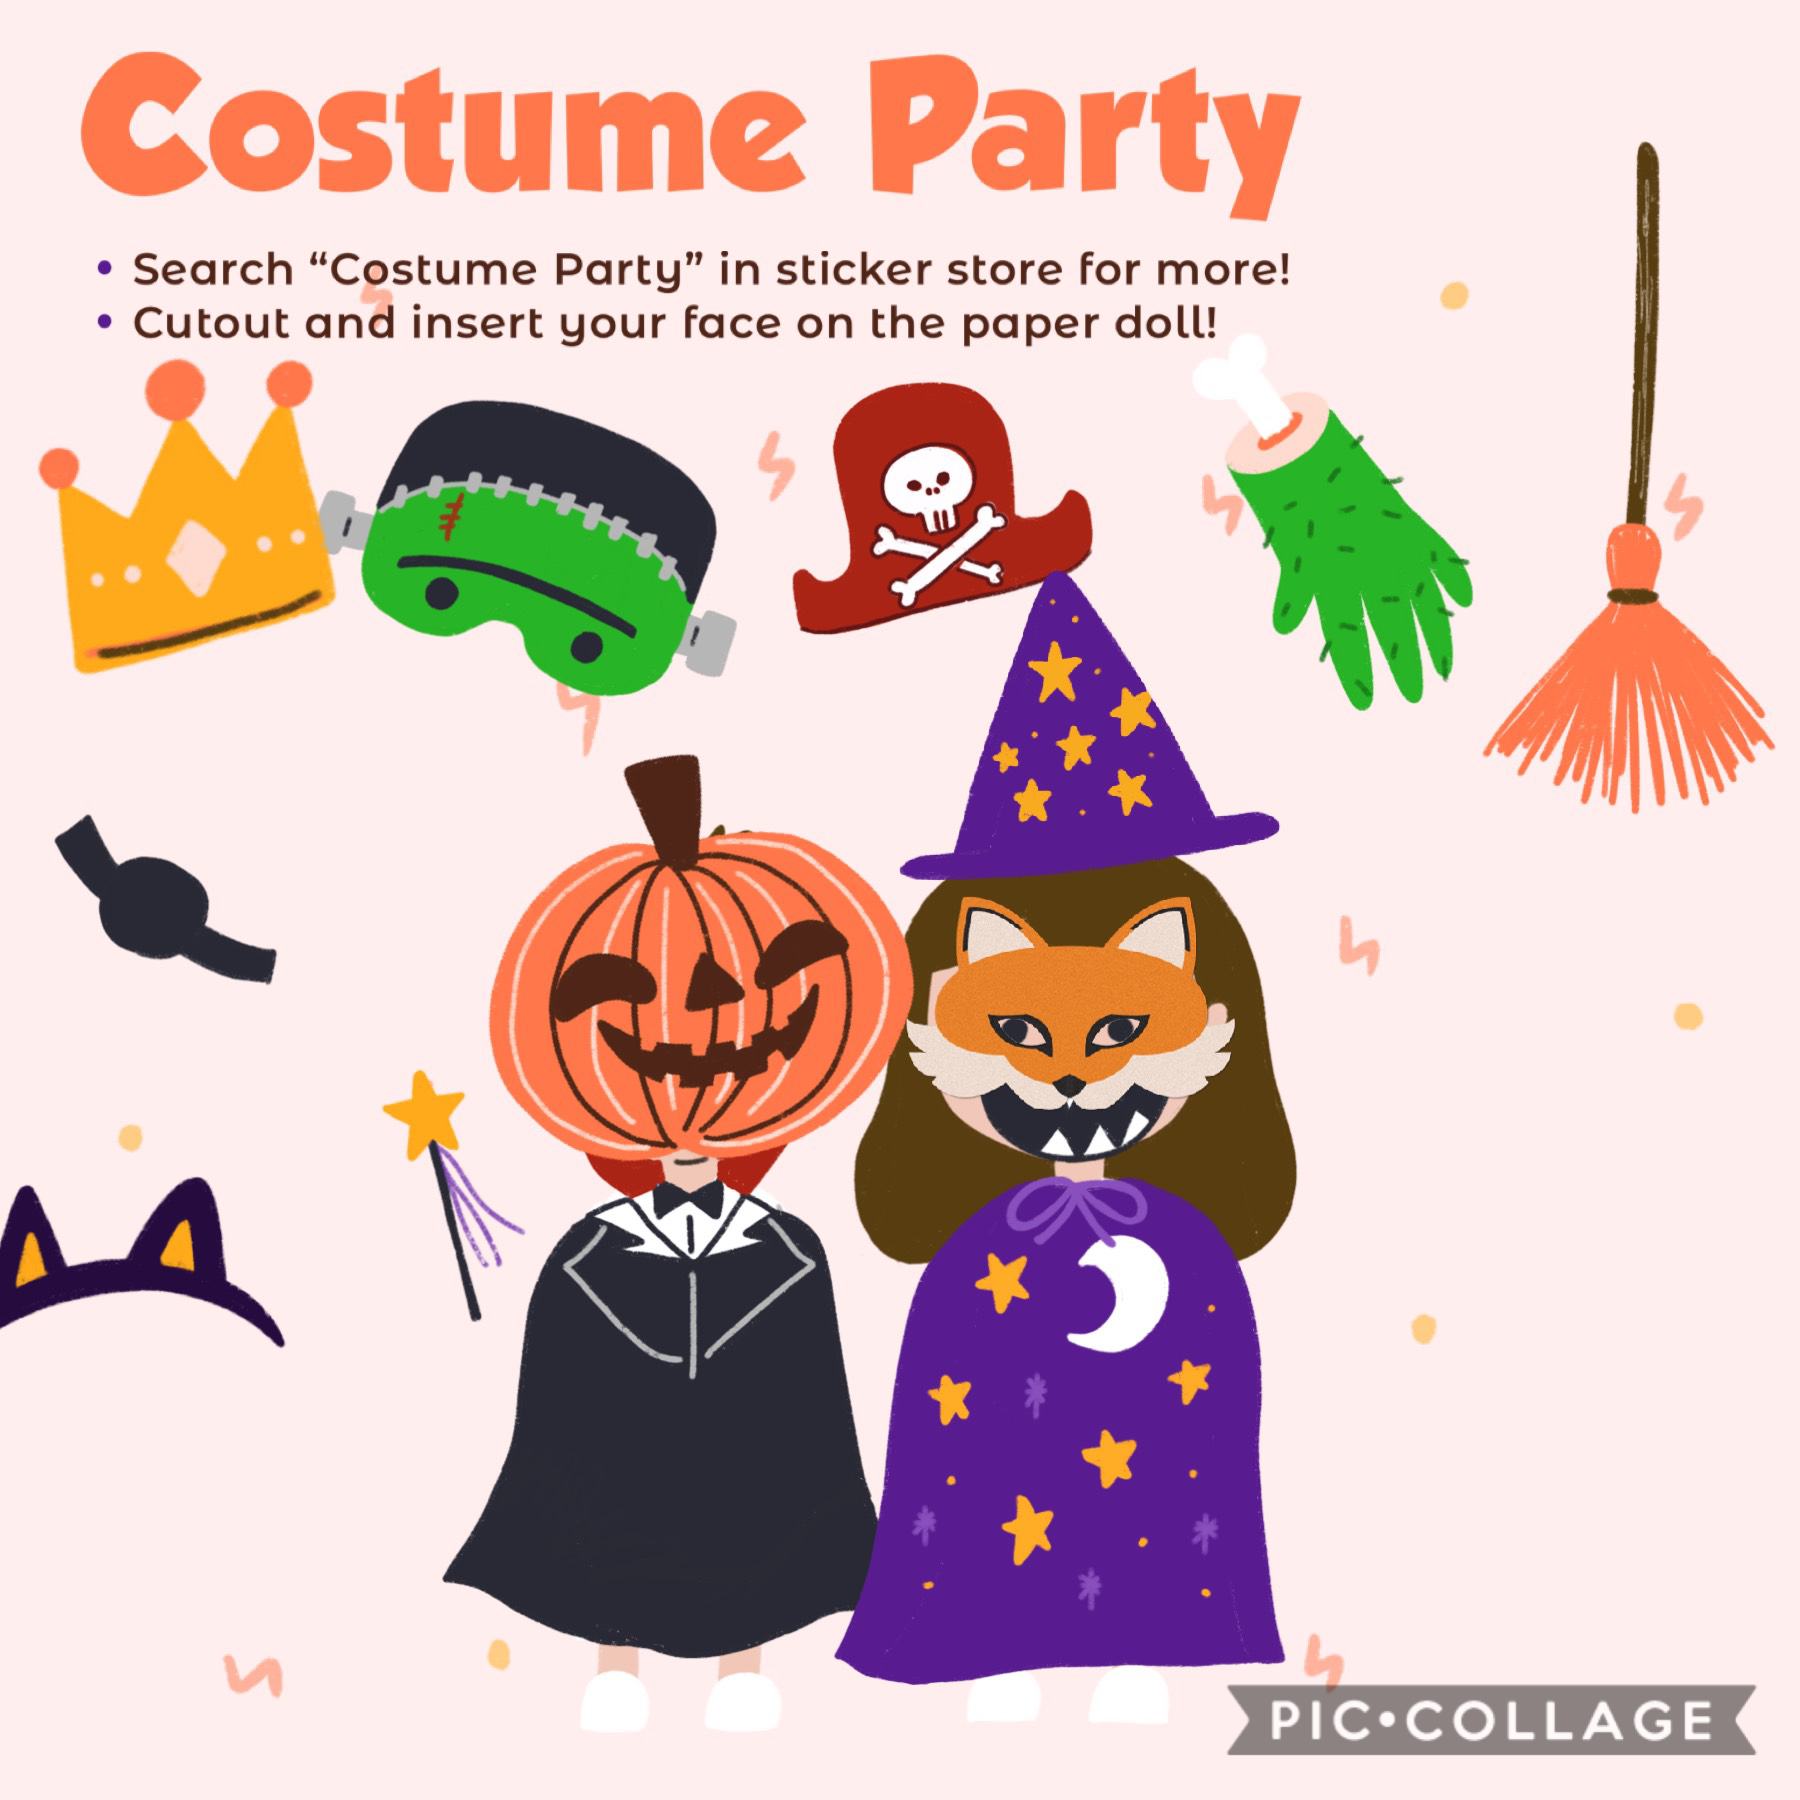 Costume party! 